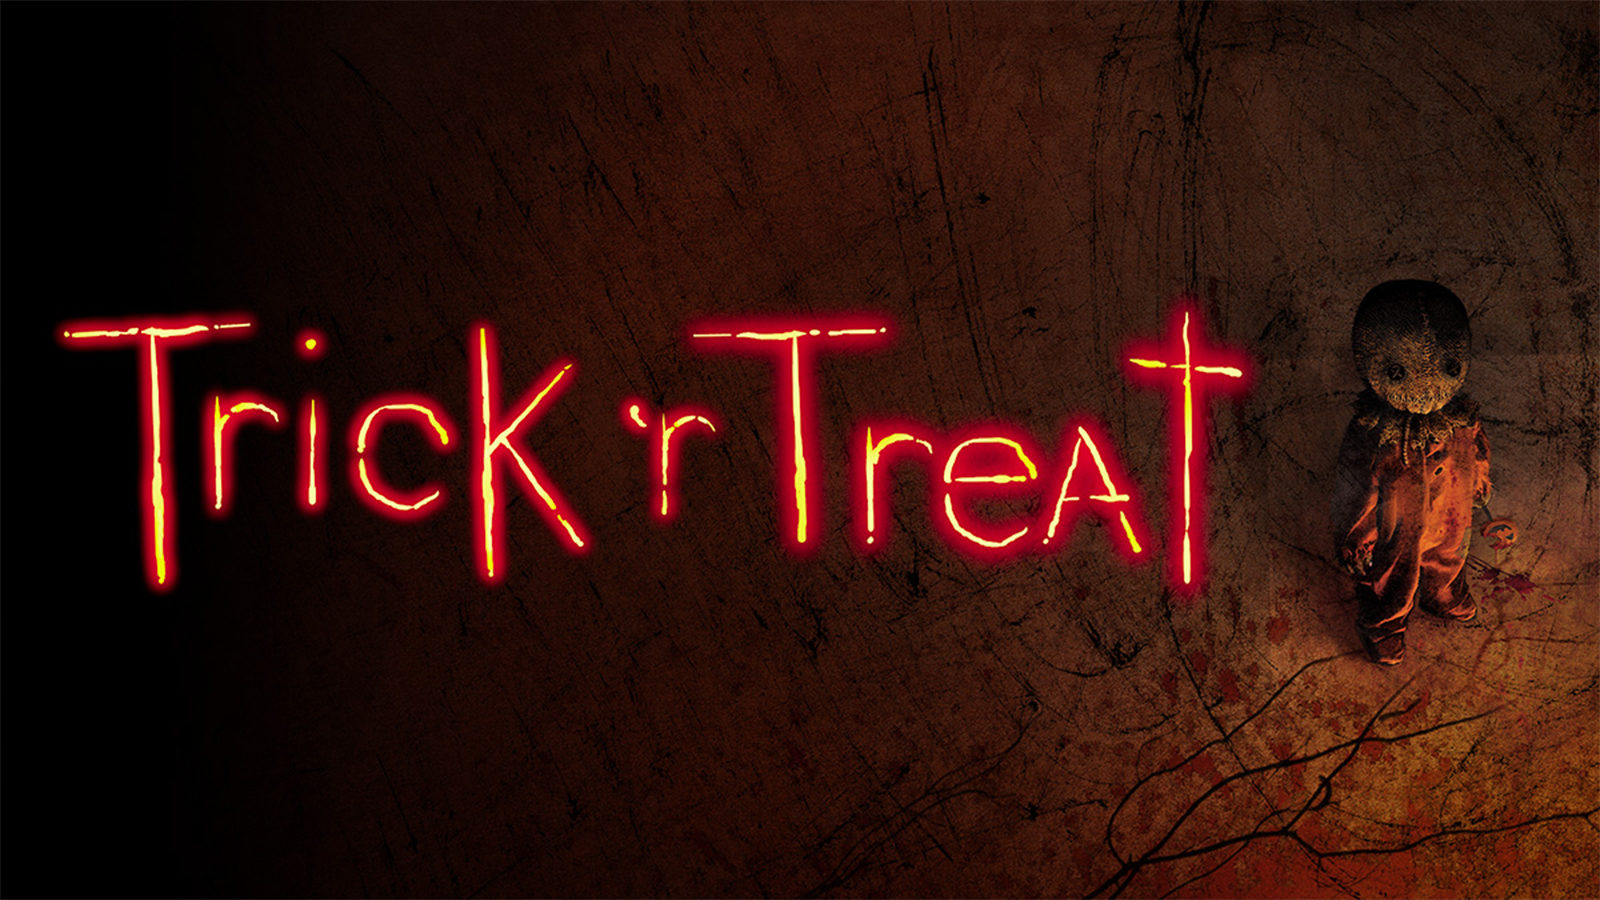 Legendary Pictures and Warner Bros. Pictures Celebrate the 15th Anniversary of “Trick ‘r Treat” with Special Beyond Fest Screening